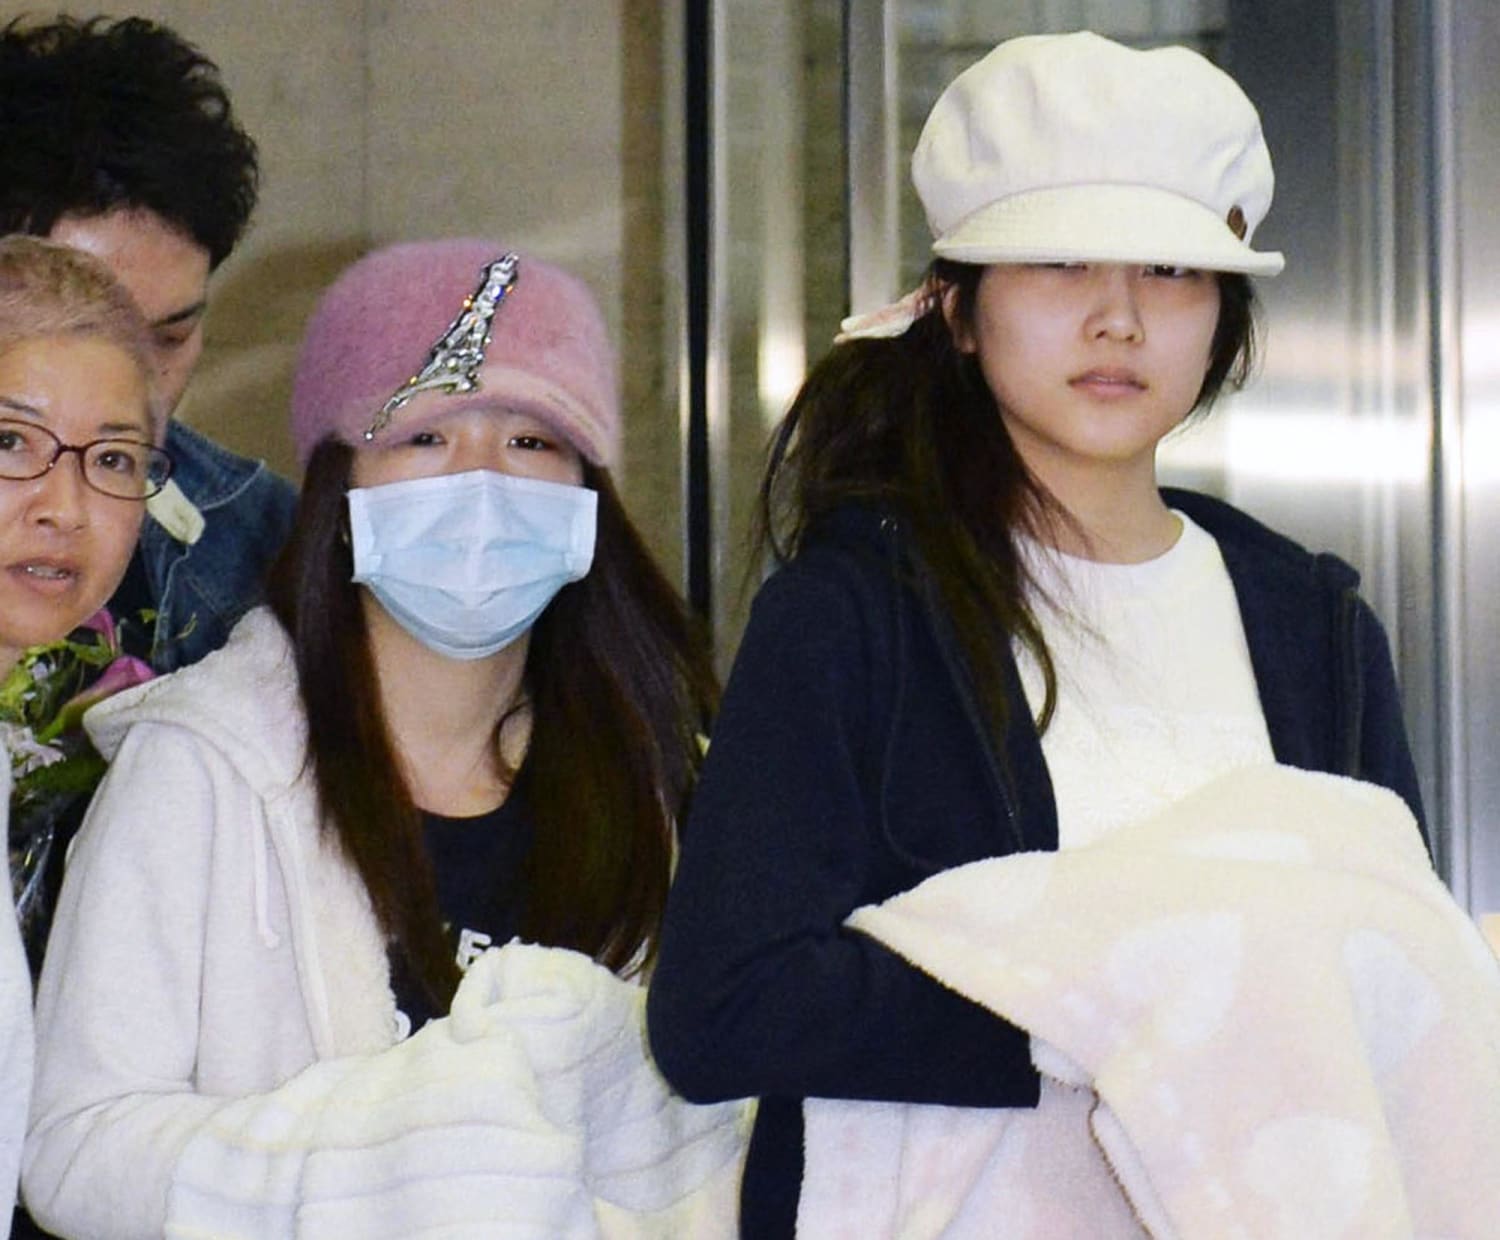 Slasher Attacks 2 Members of Japan's AKB48 Girl Band at Fan Event.